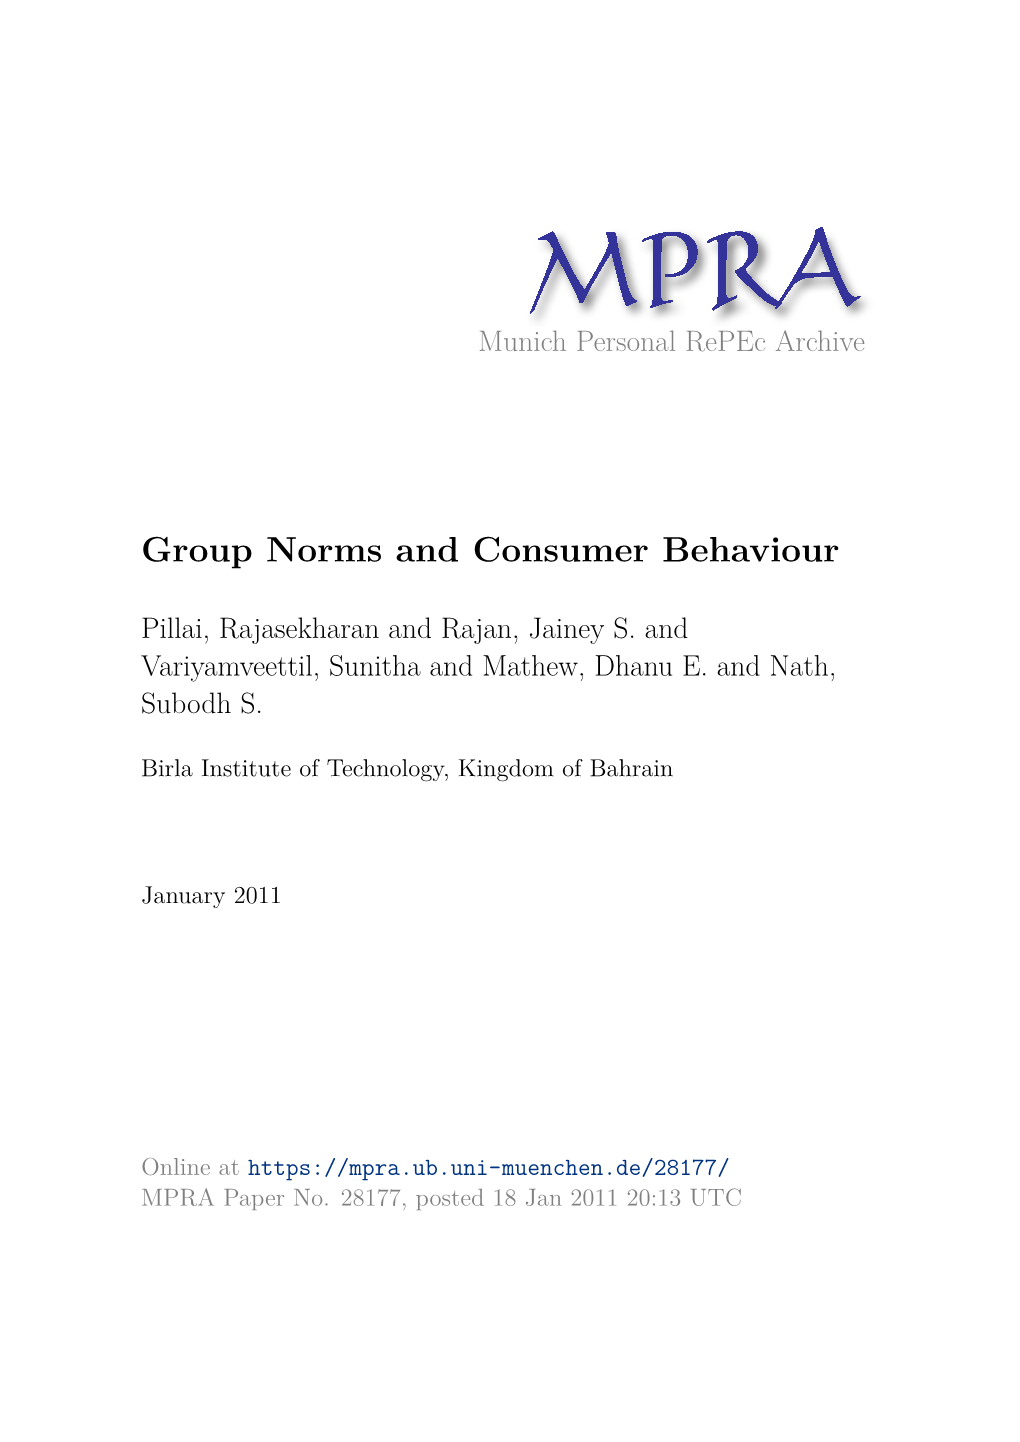 Group Norms and Consumer Behaviour